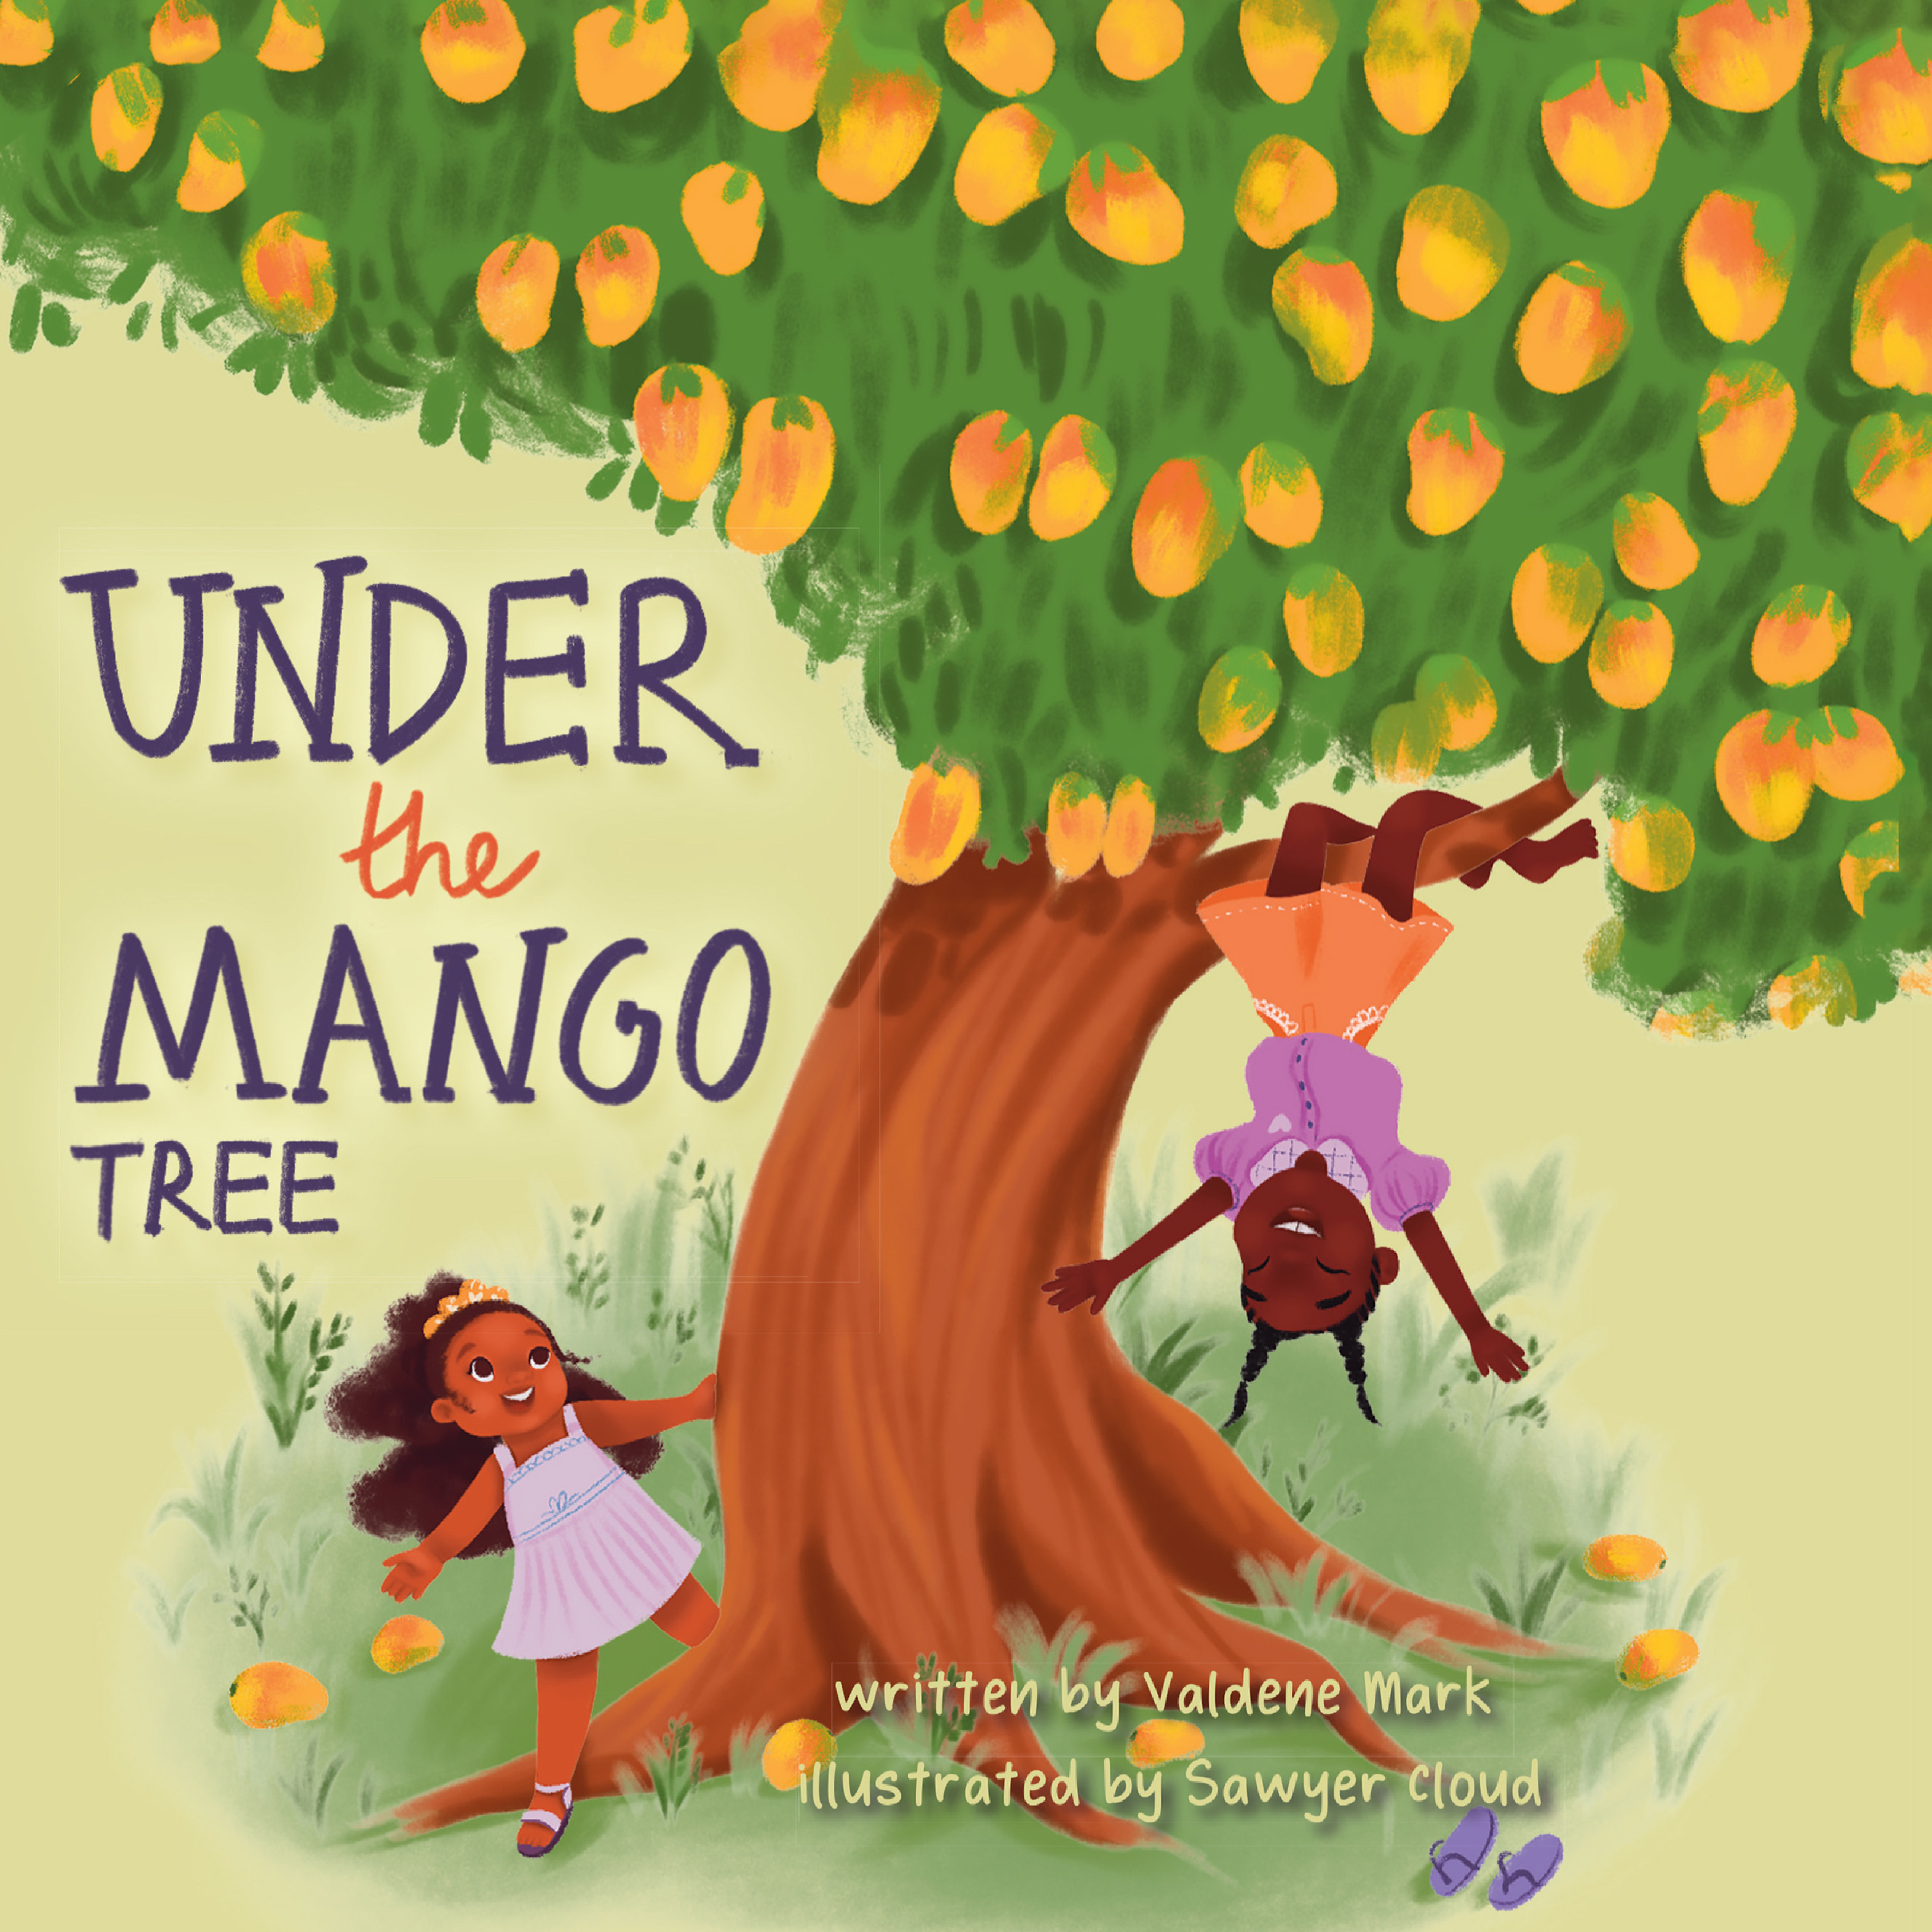 Founder of Sugar Apple Books Set to Release New Book "Under the Mango Tree"